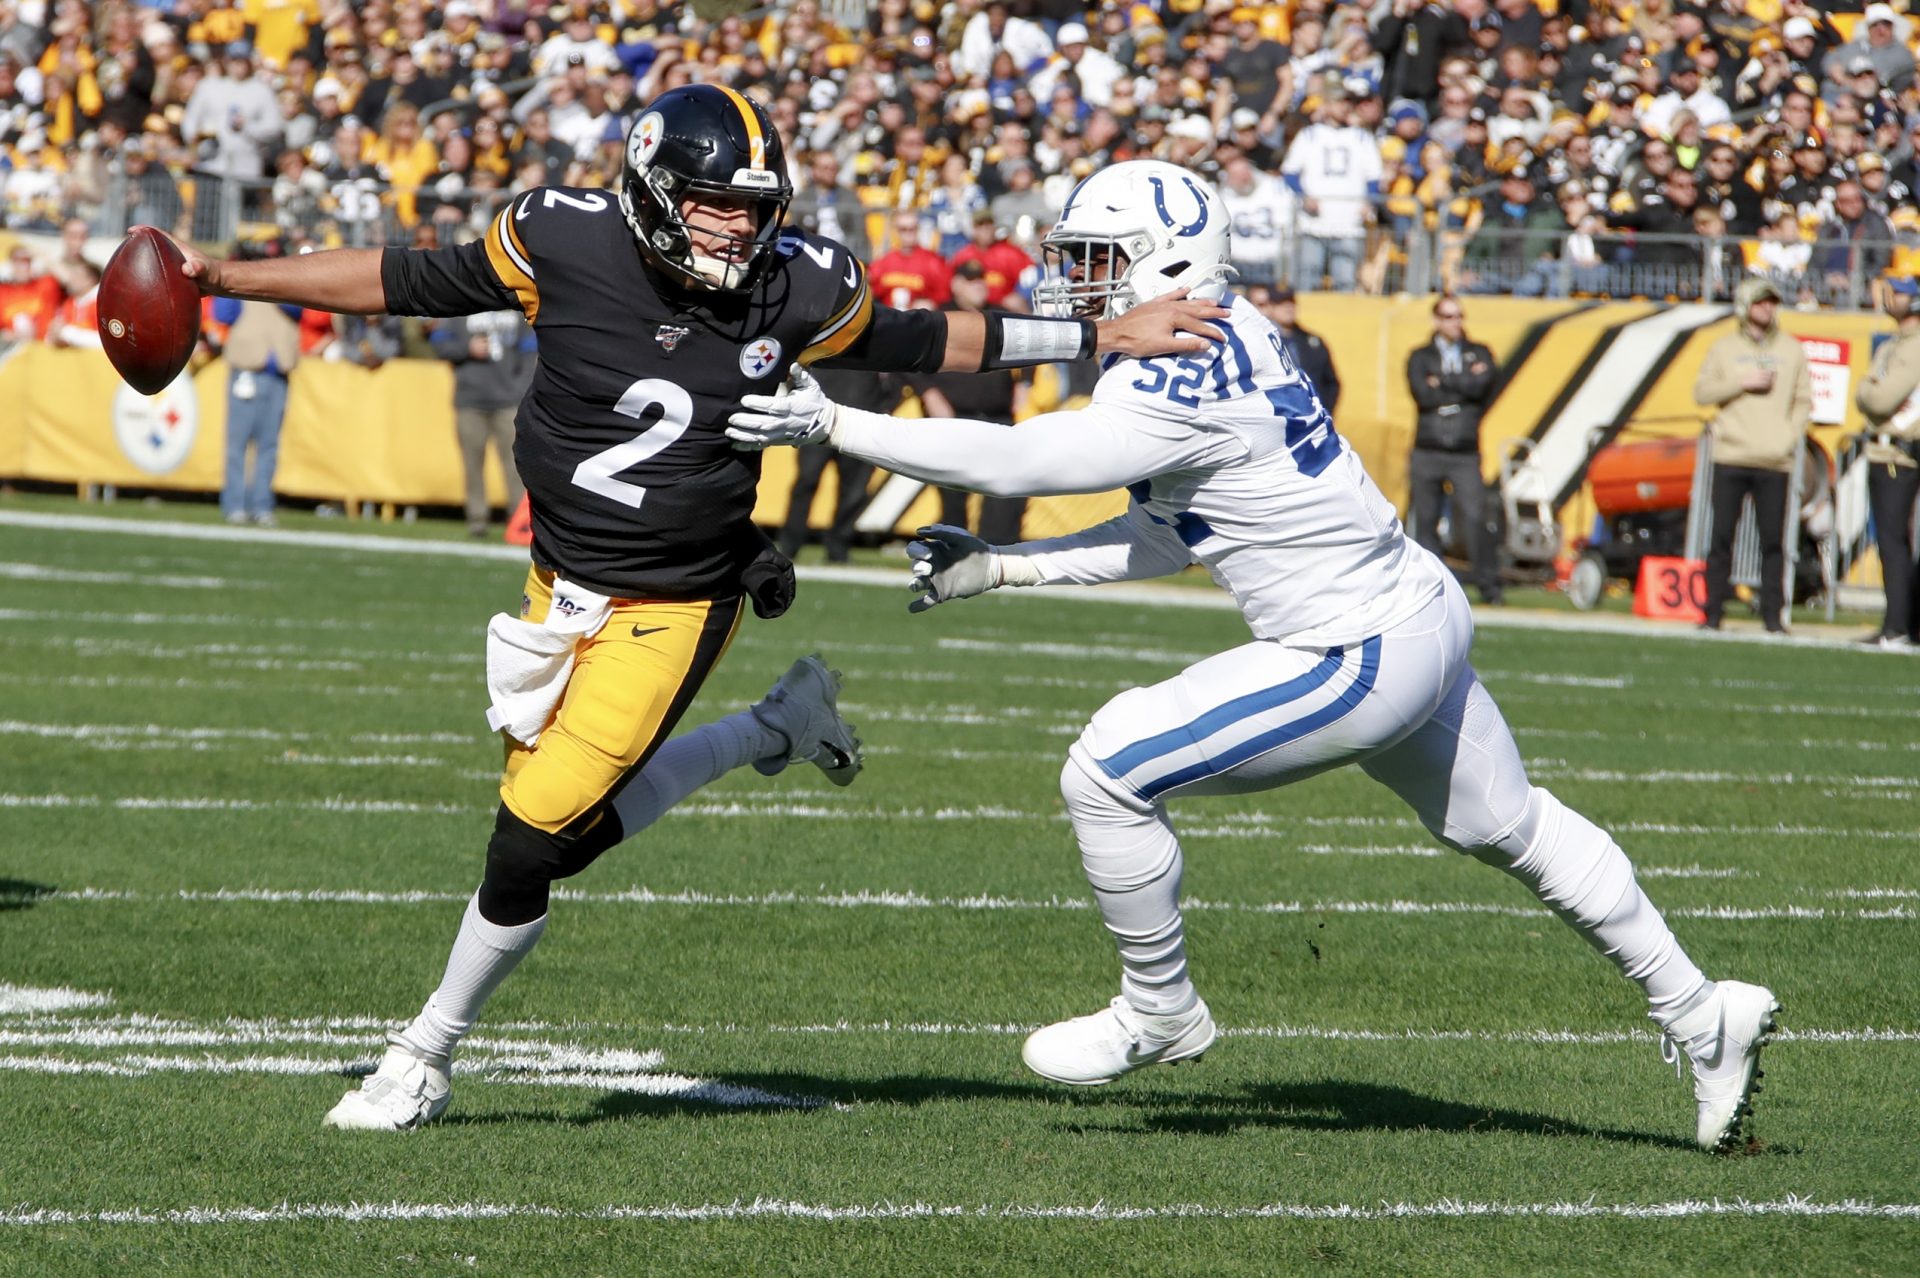 Pittsburgh Steelers quarterback Mason Rudolph (2) scrambles away from Indianapolis Colts defensive end Ben Banogu (52) in the first half of an NFL football game , Sunday, Nov. 3, 2019, in Pittsburgh.